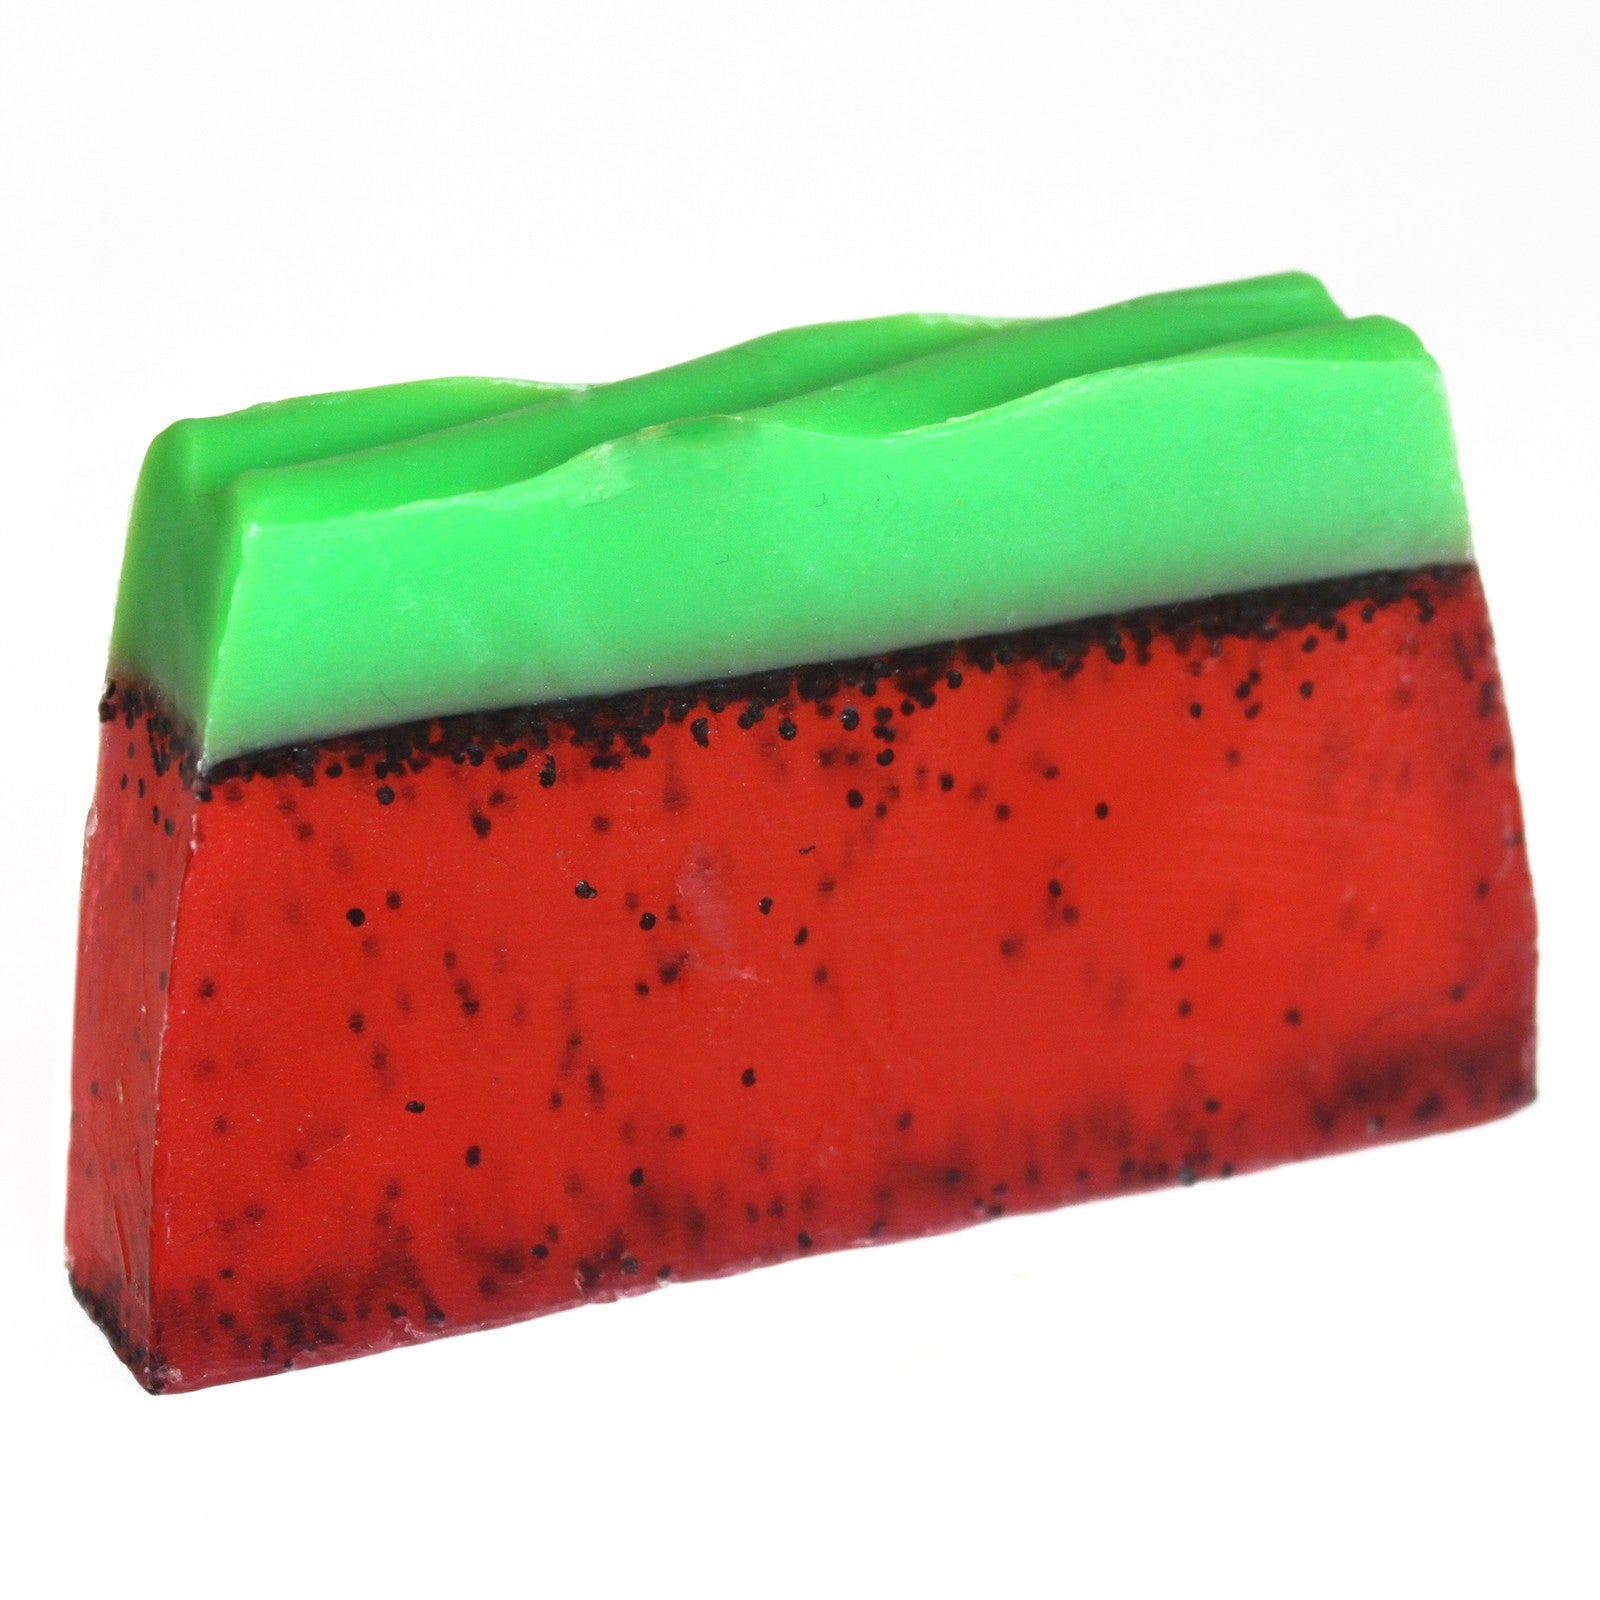 Tropical Paradise Soap Loaf - Strawberry-